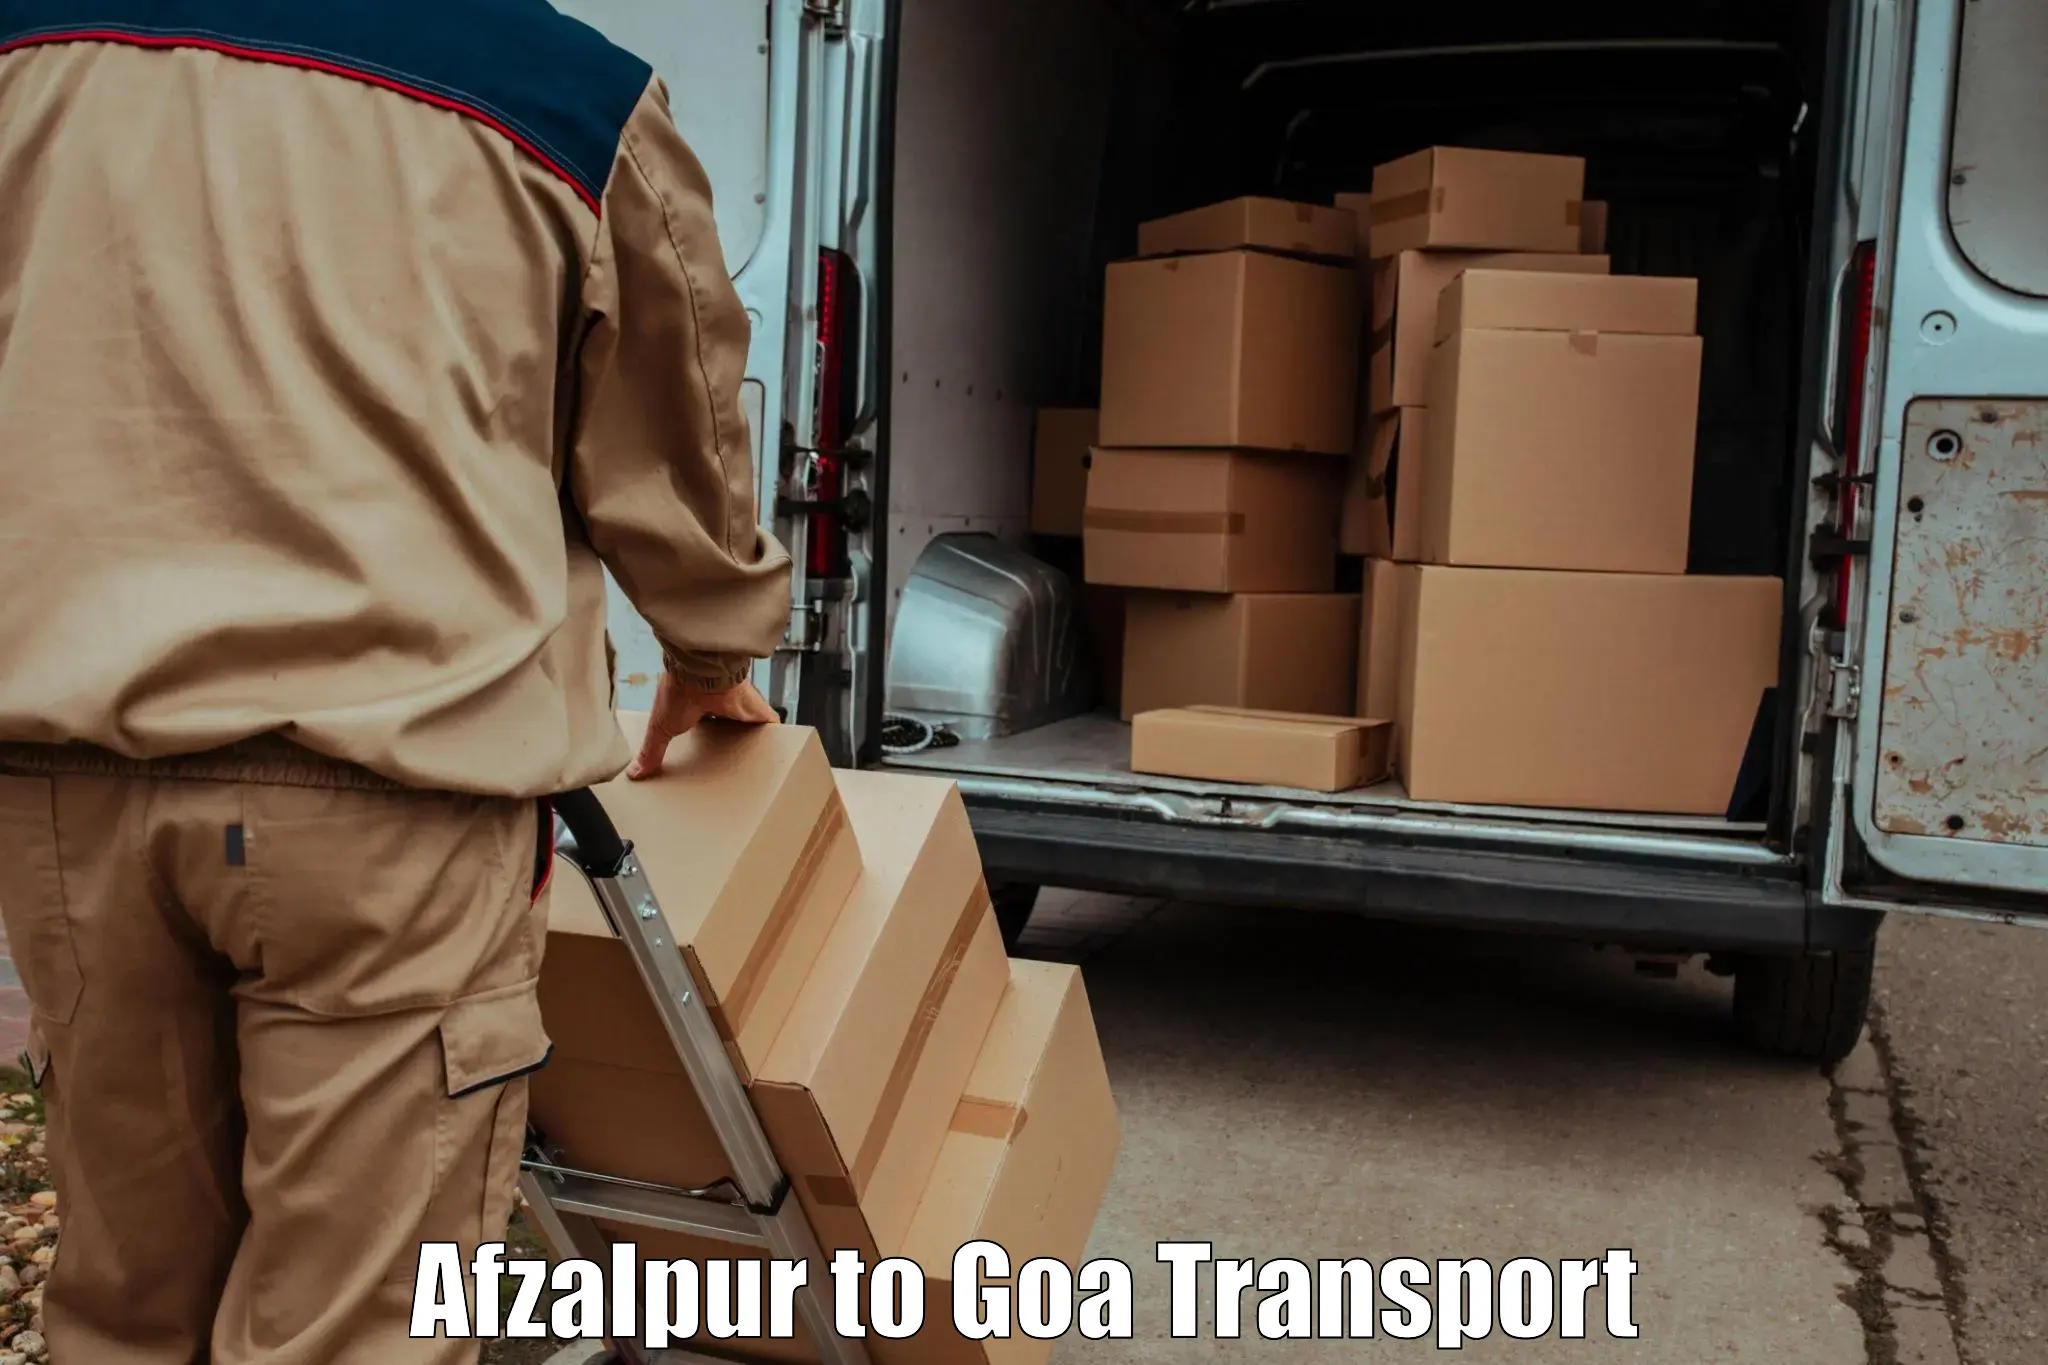 Transport in sharing in Afzalpur to Mormugao Port